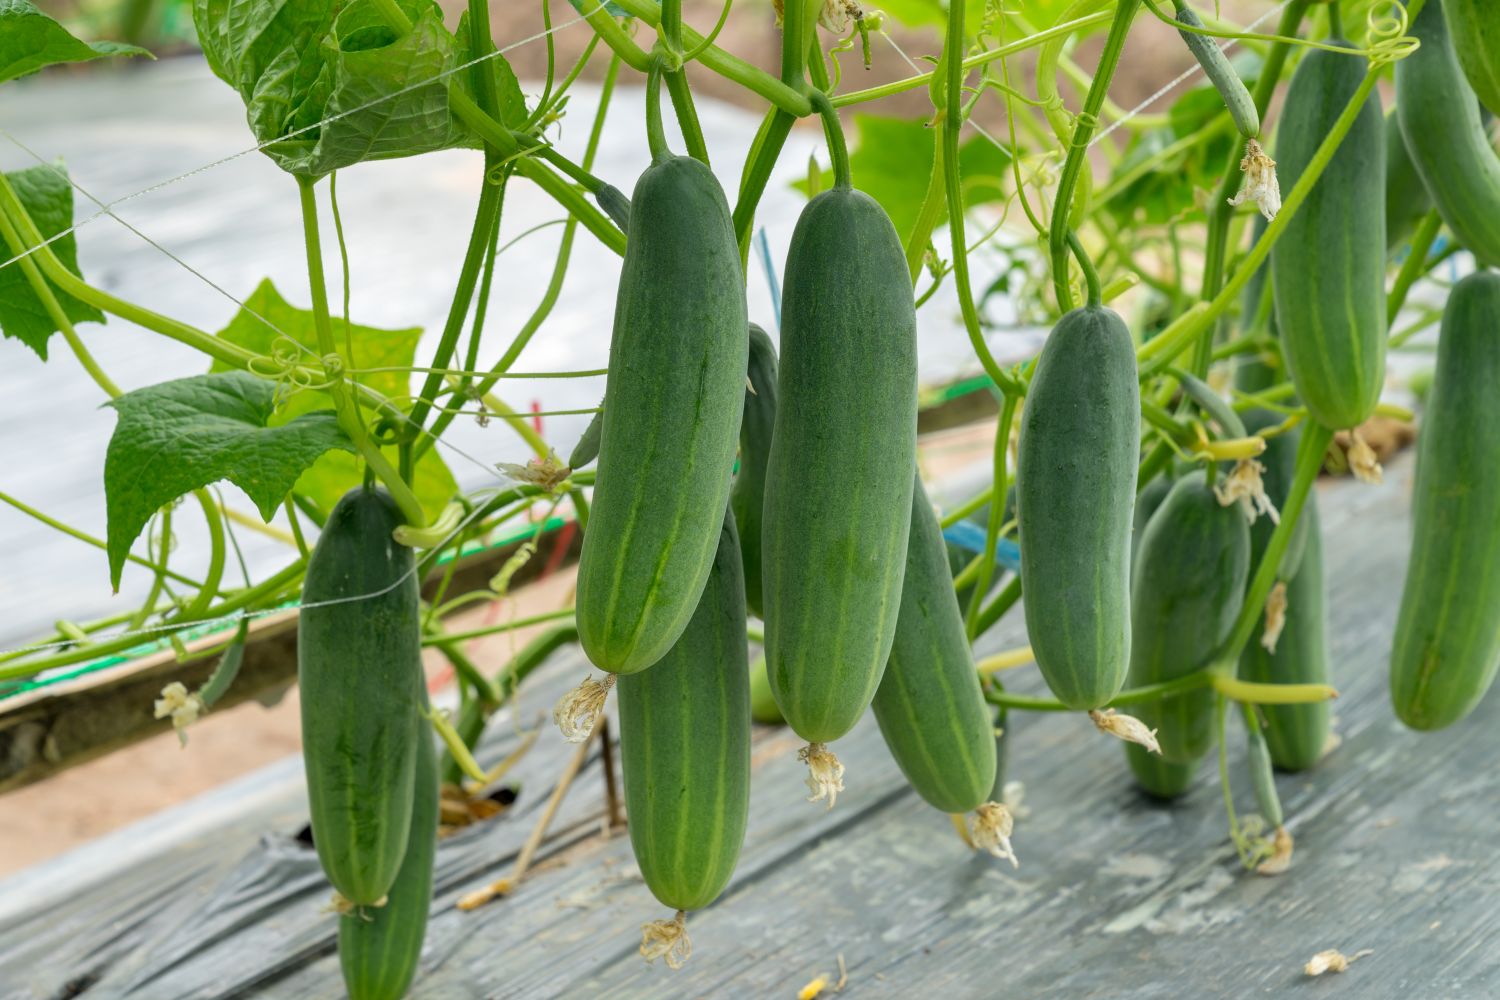 Cucumber fruit growing on the vine